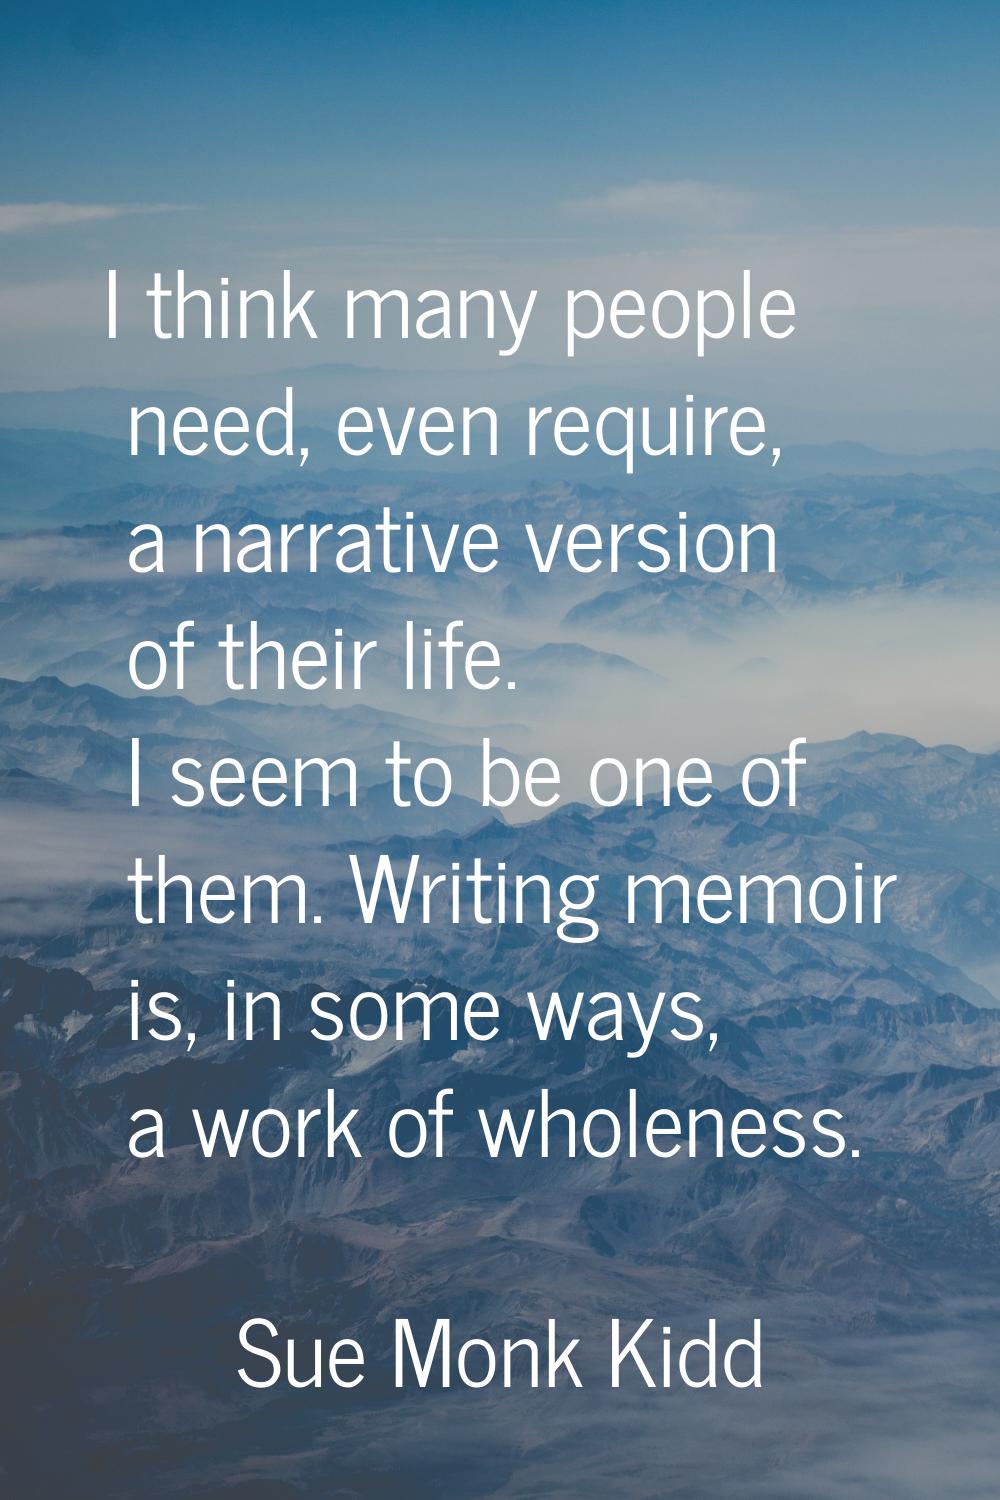 I think many people need, even require, a narrative version of their life. I seem to be one of them